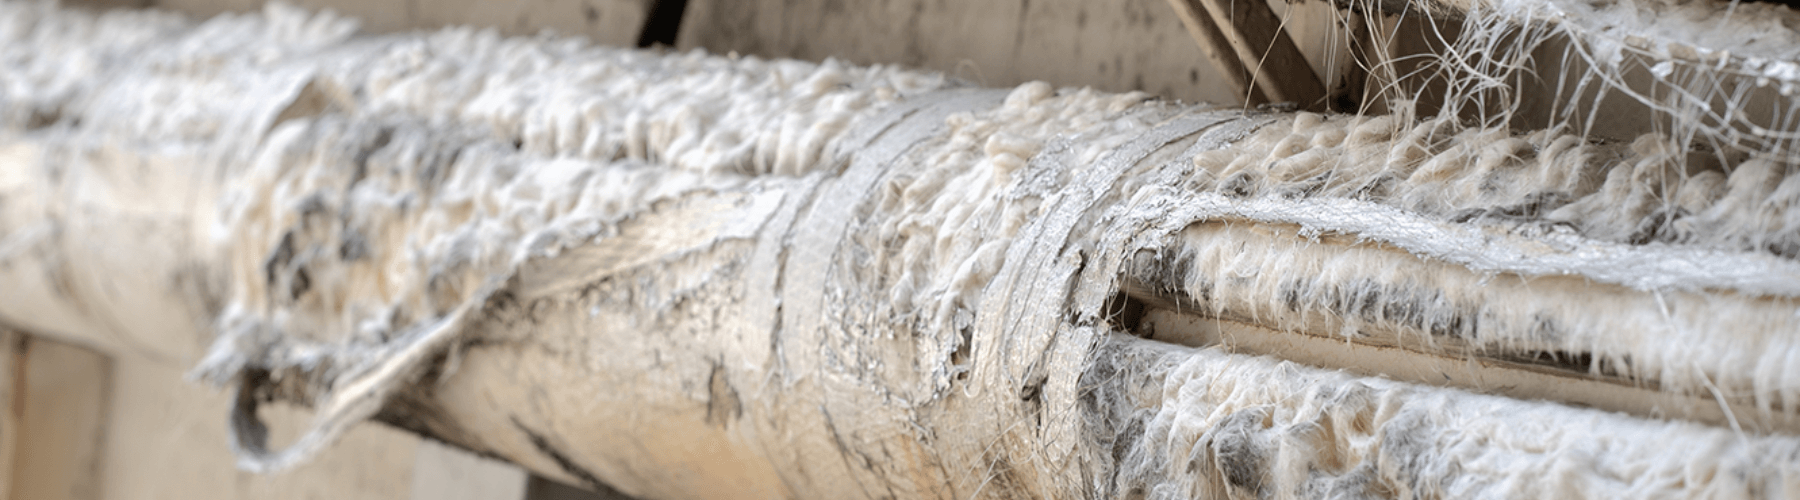 Close up of a pipe, with tape adhesive wrapped around it, containing asbestos